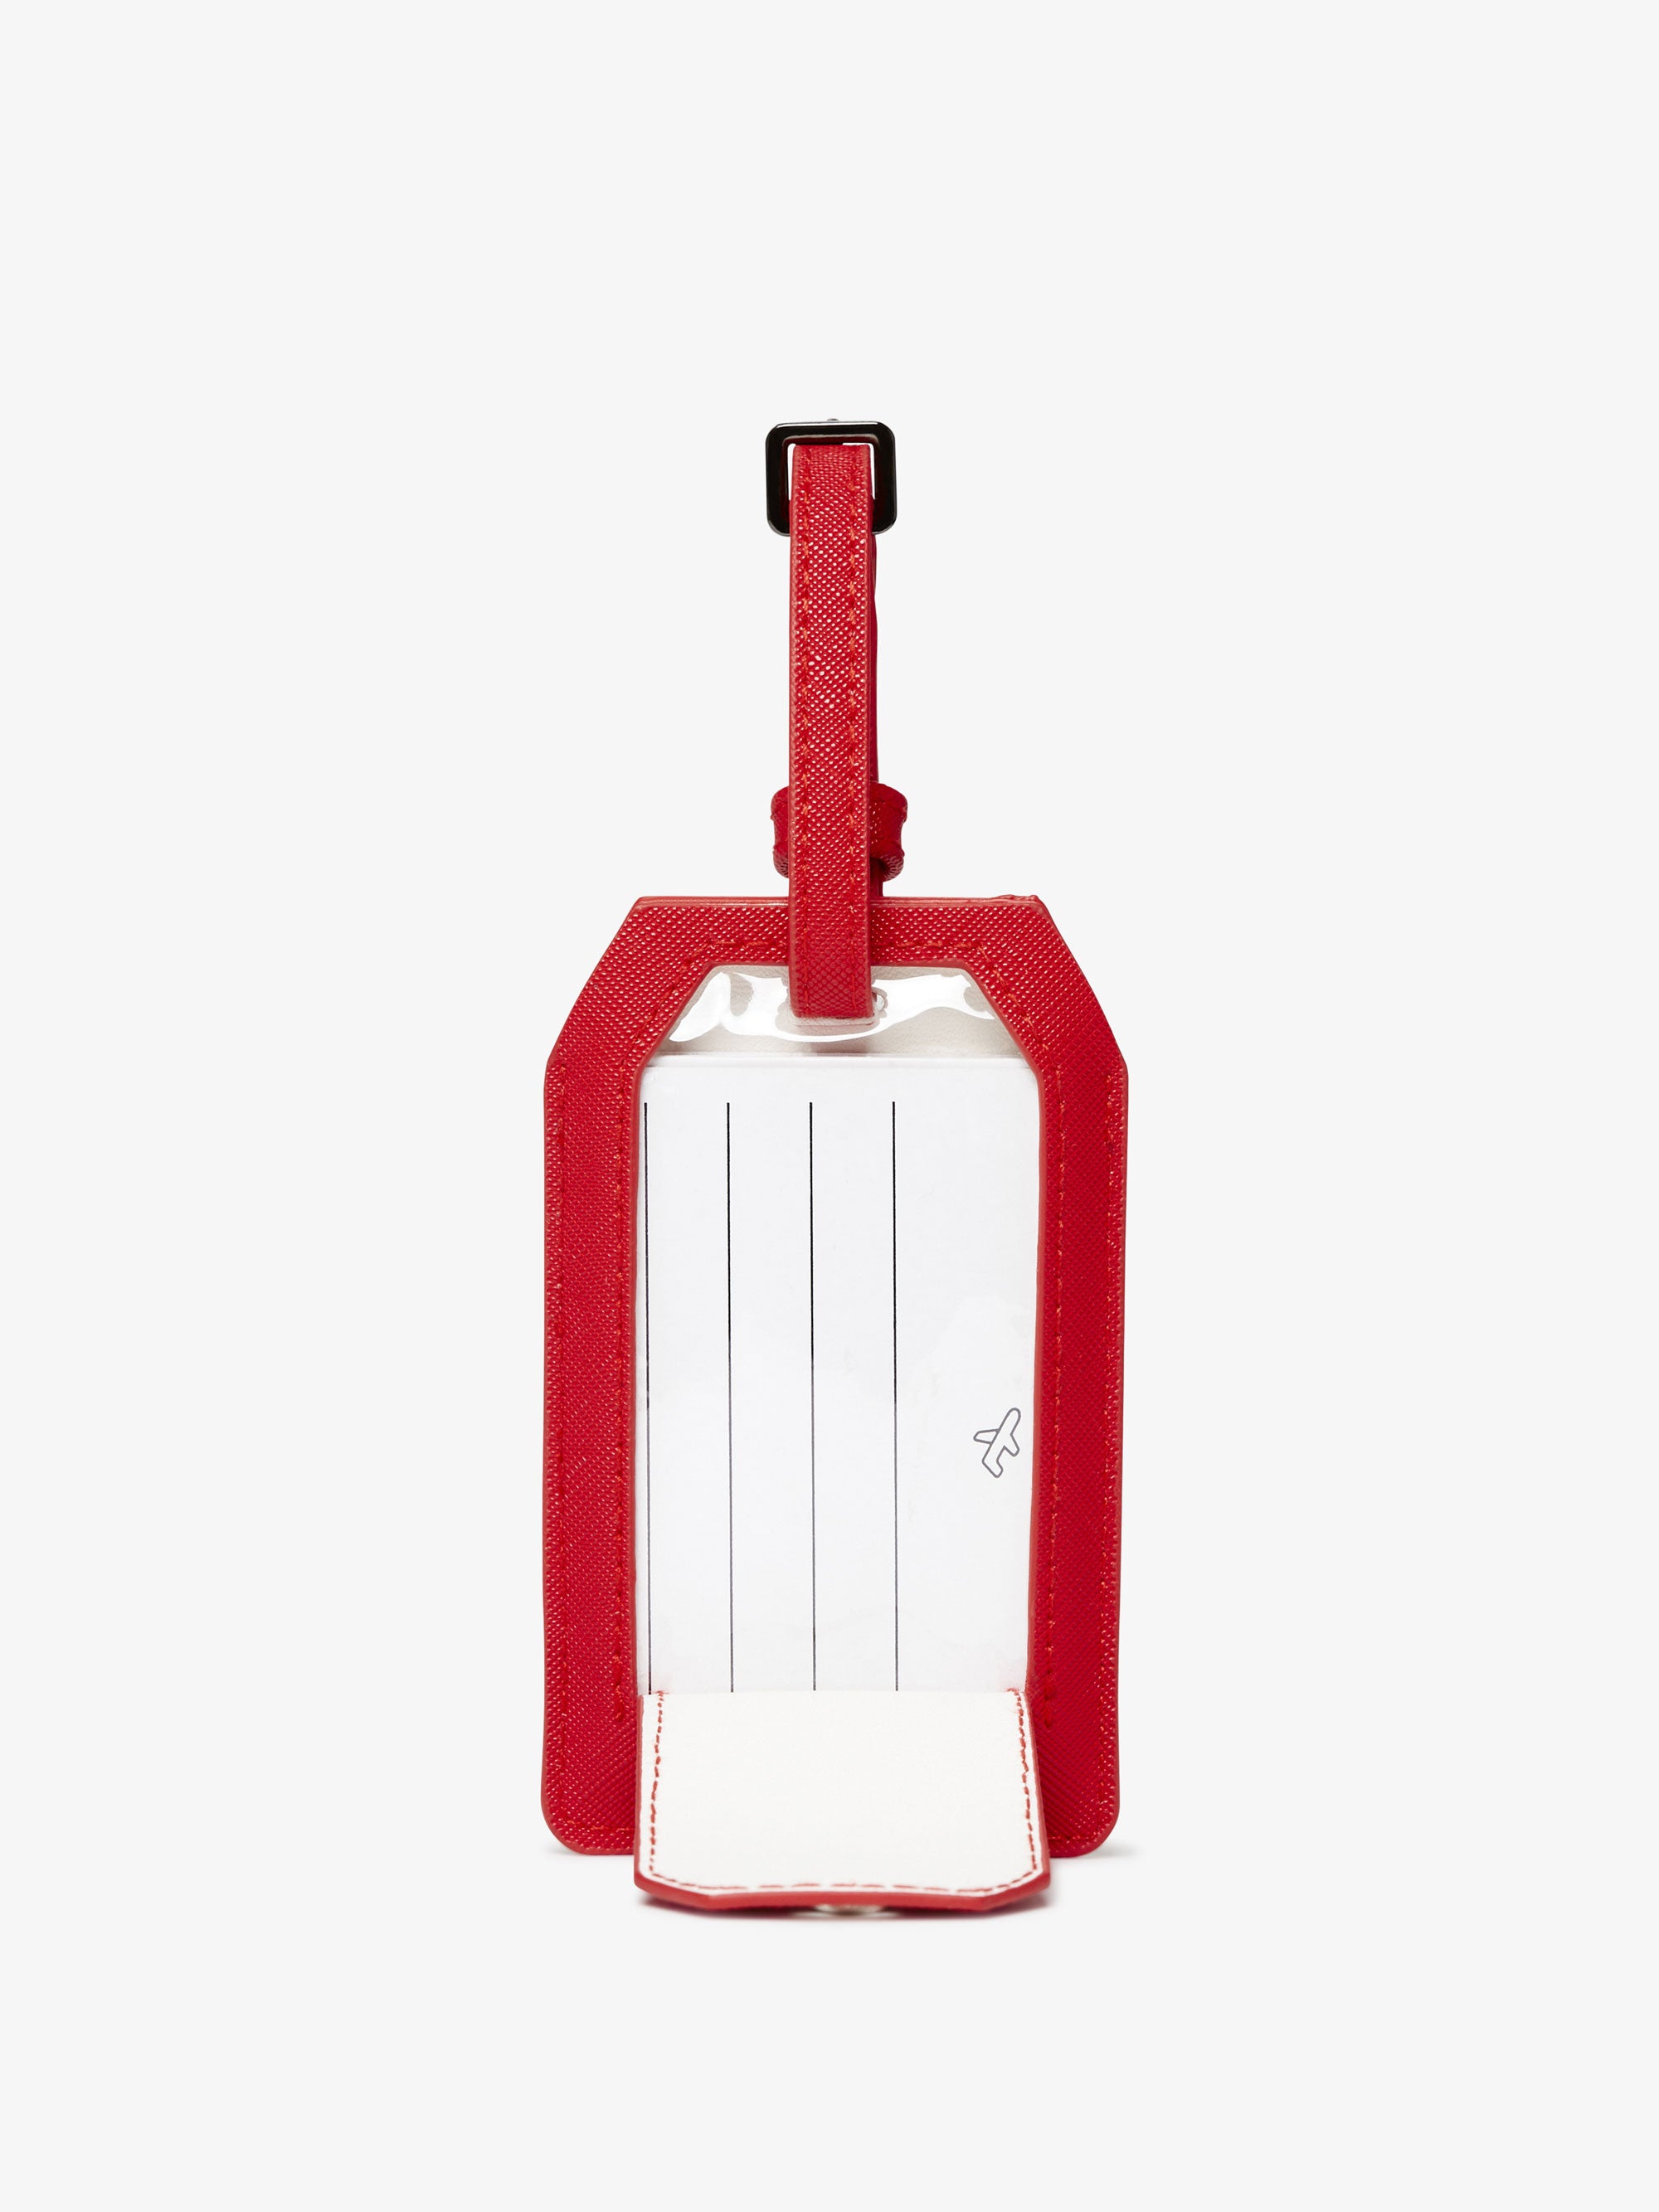 red luggage tag with portable chargers inside